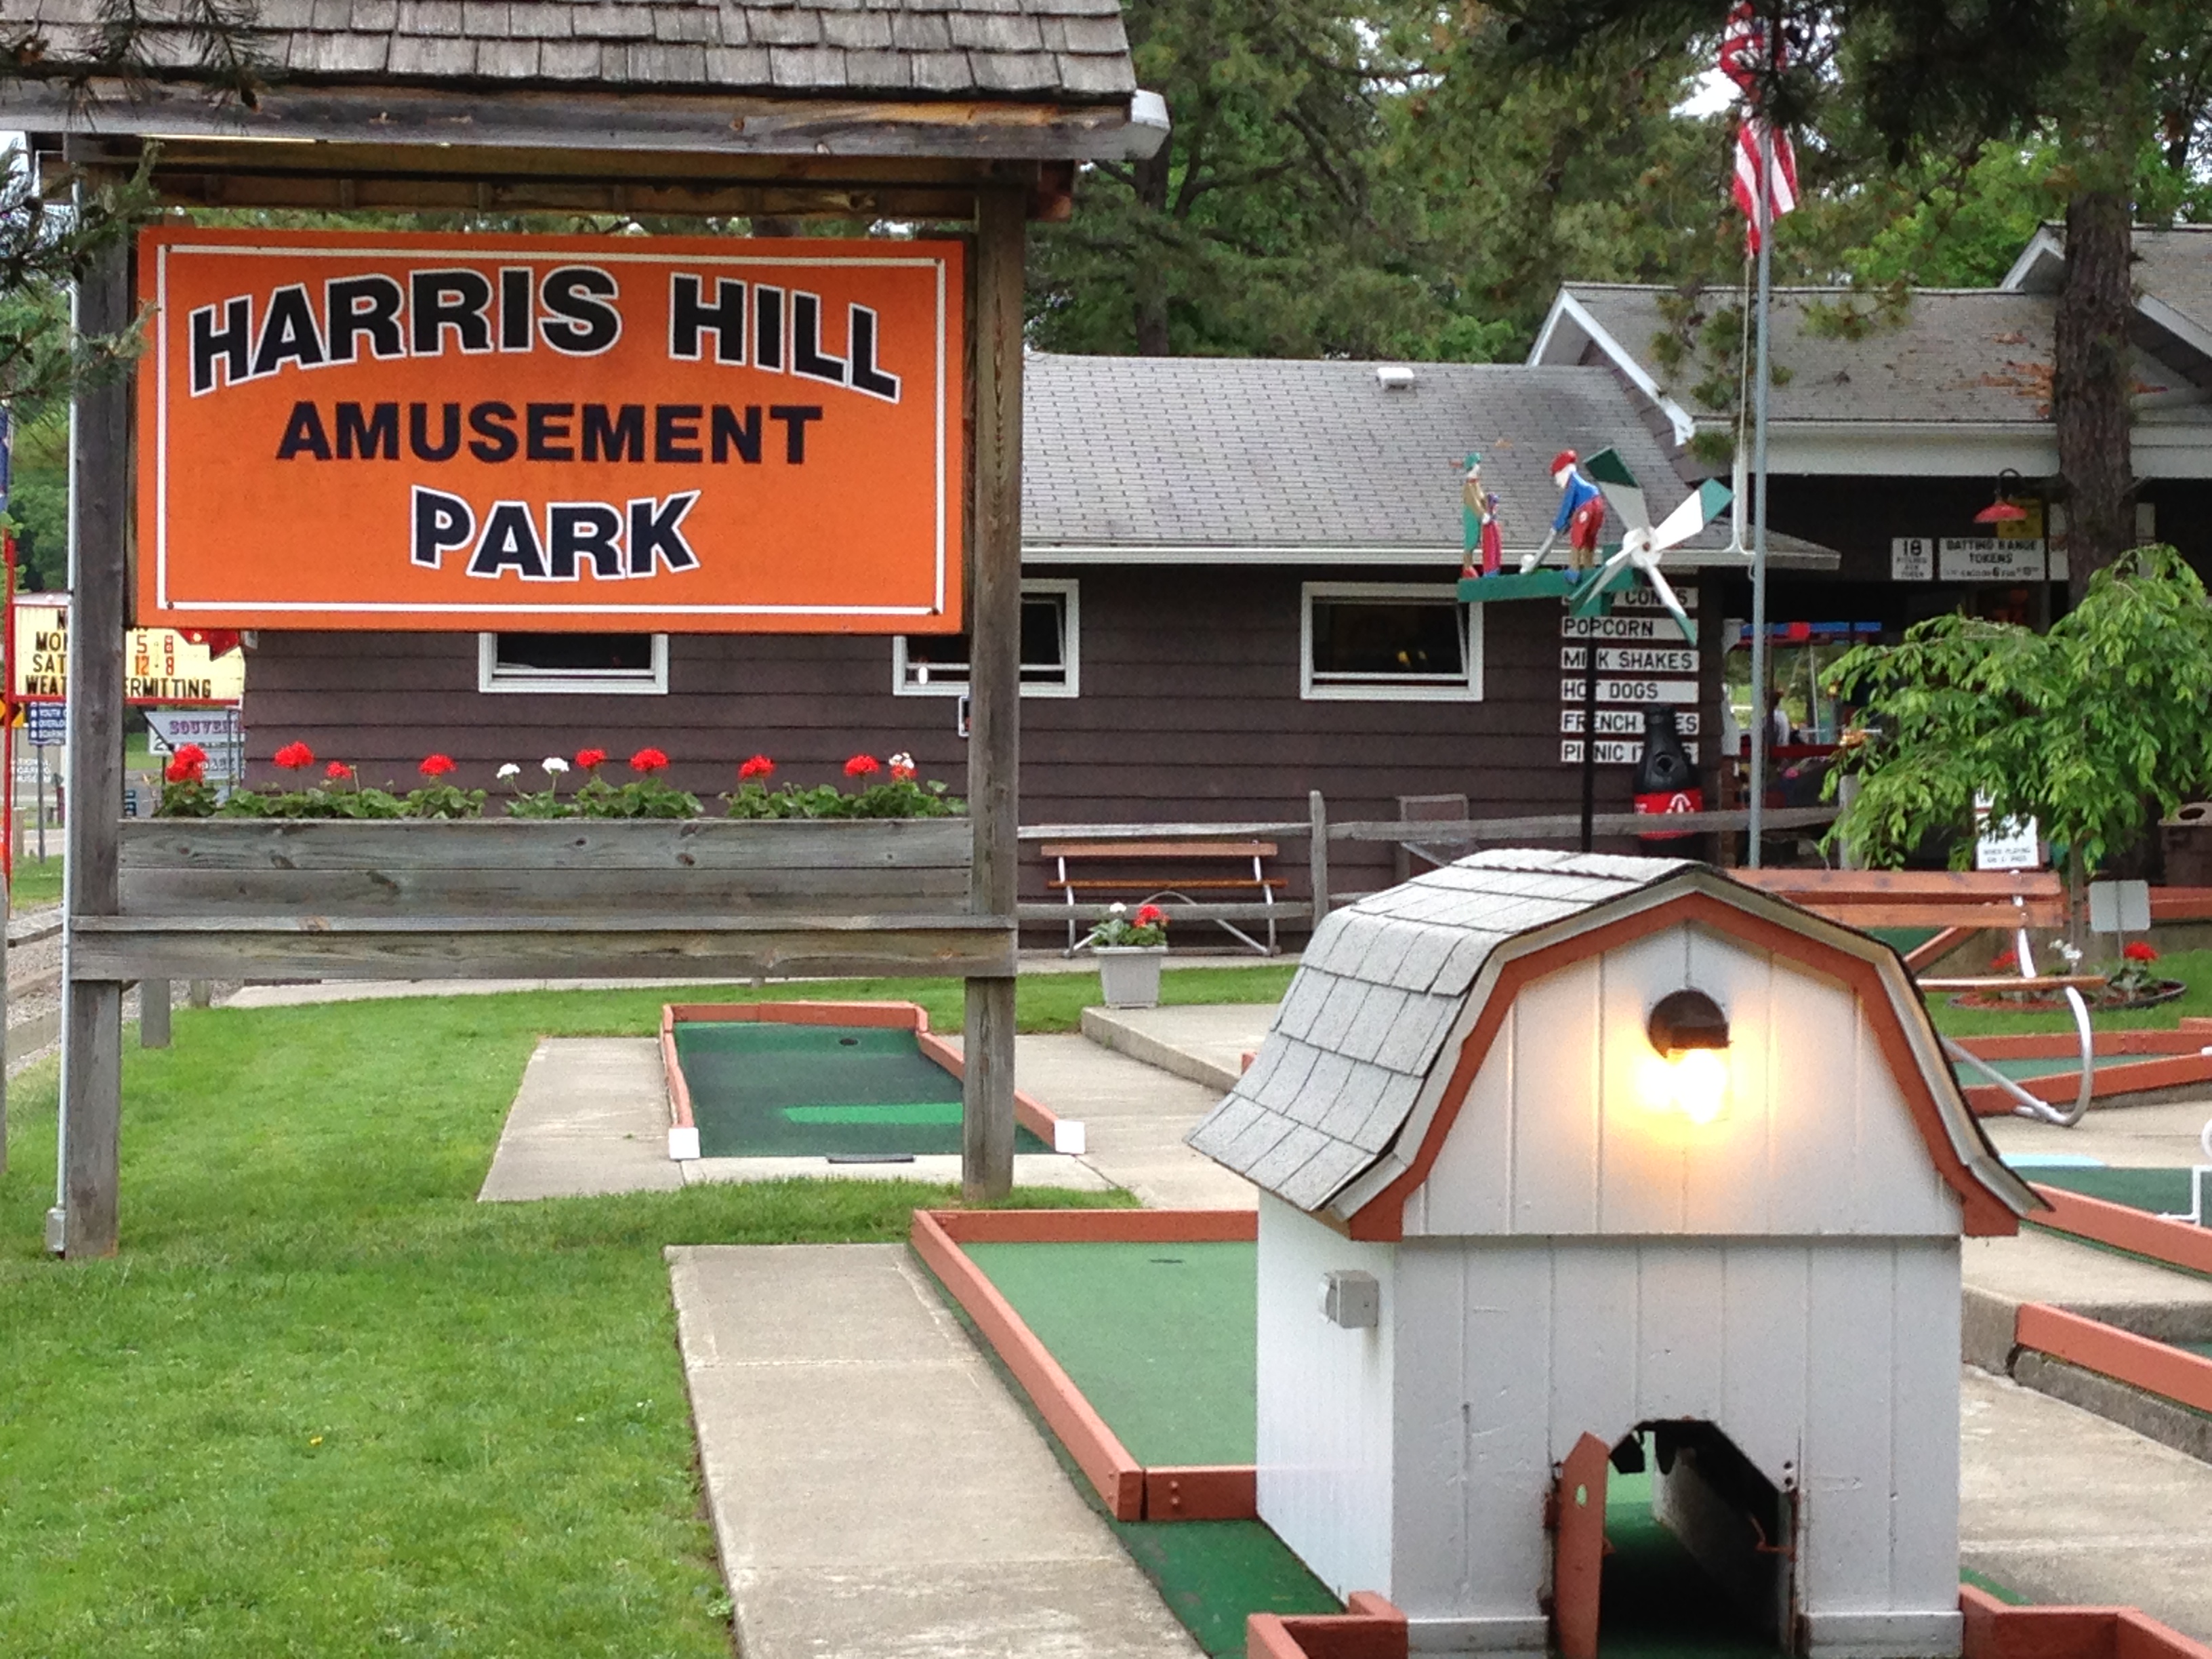 Harris Hill Putt Putt: Some Things Never Get Old